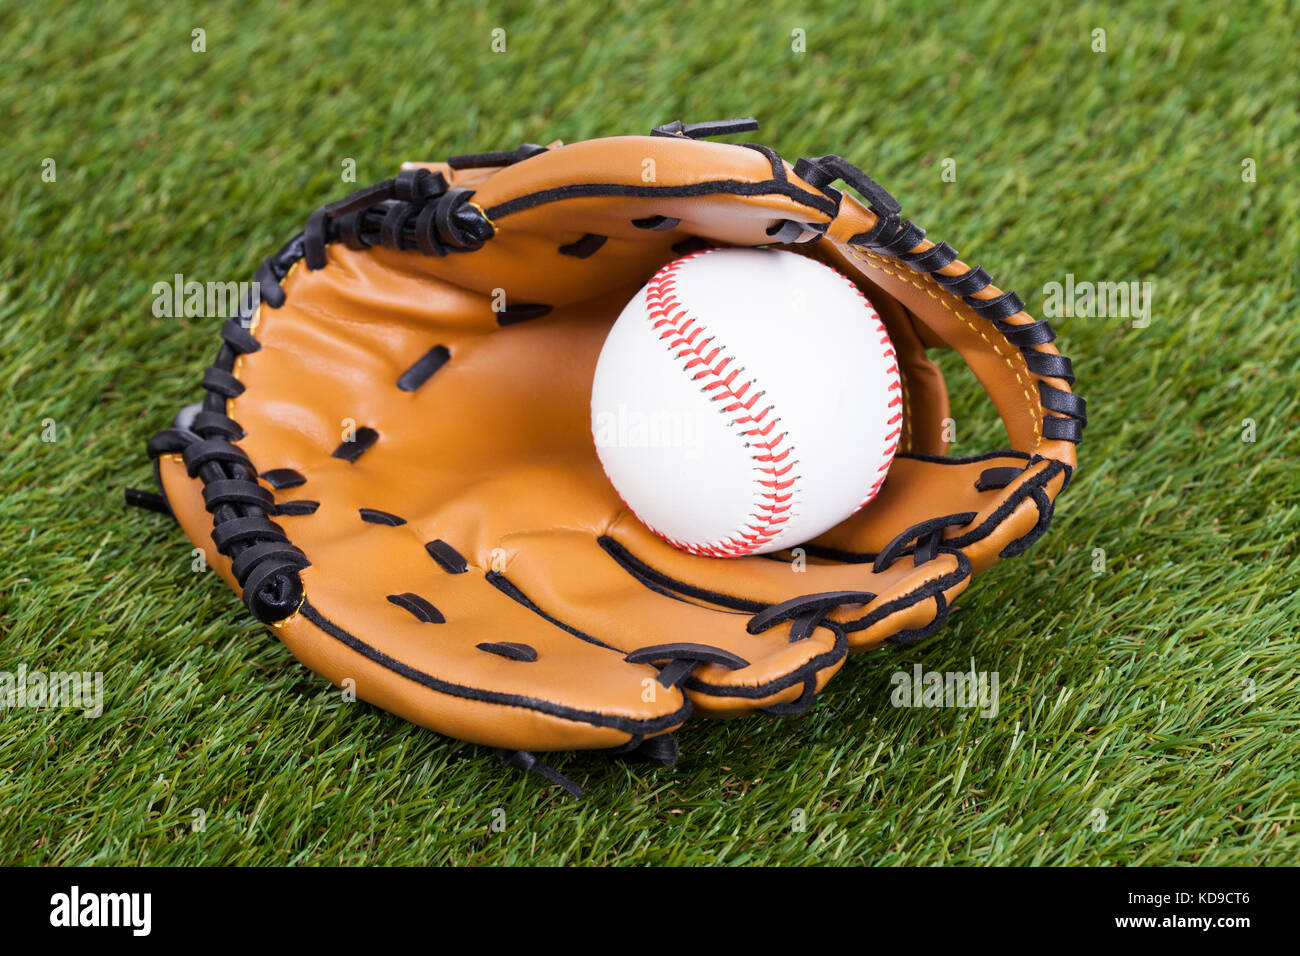 Leather Glove With Baseball Ball On Green Pitch Stock Photo